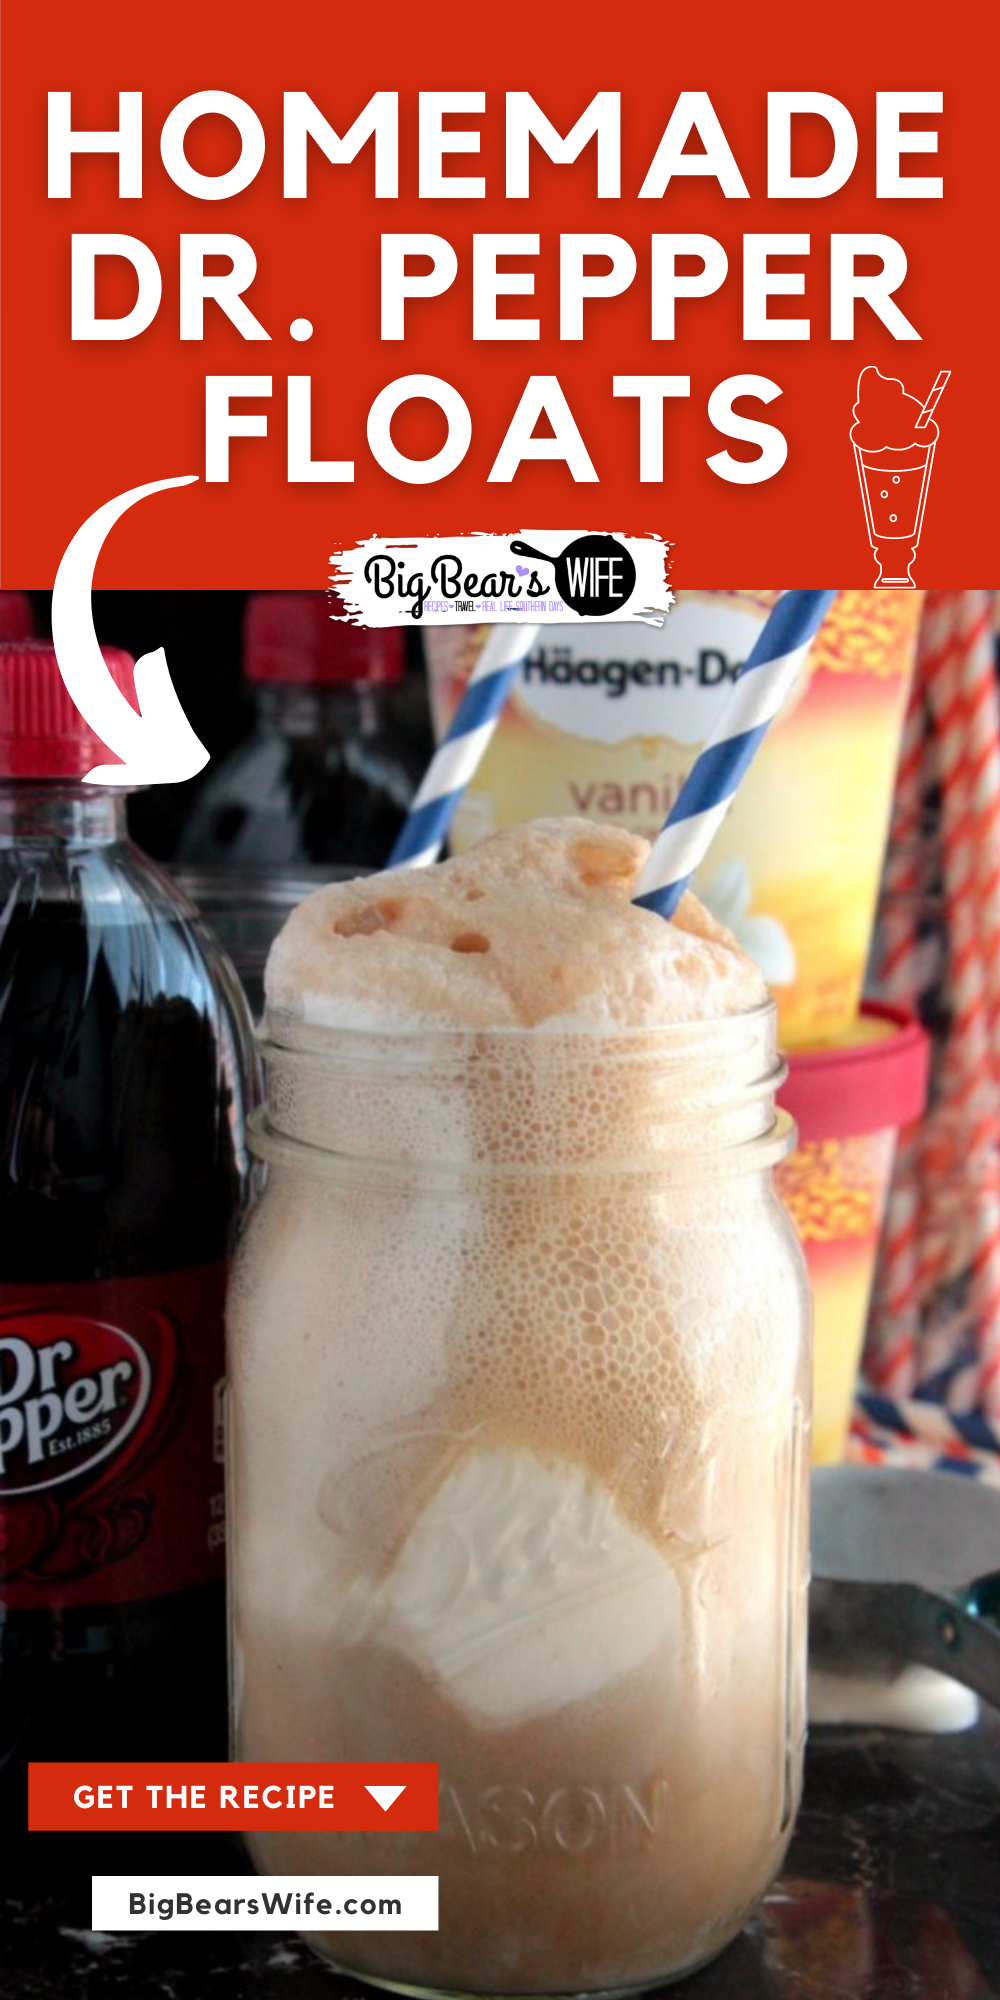 Homemade Dr. Pepper Floats are one of my mom's favorite ice cream treats! I just knew that these would be the perfect treat to make for her Birthday! This is how I make super easy Homemade Dr. Pepper Ice Cream Floats! via @bigbearswife